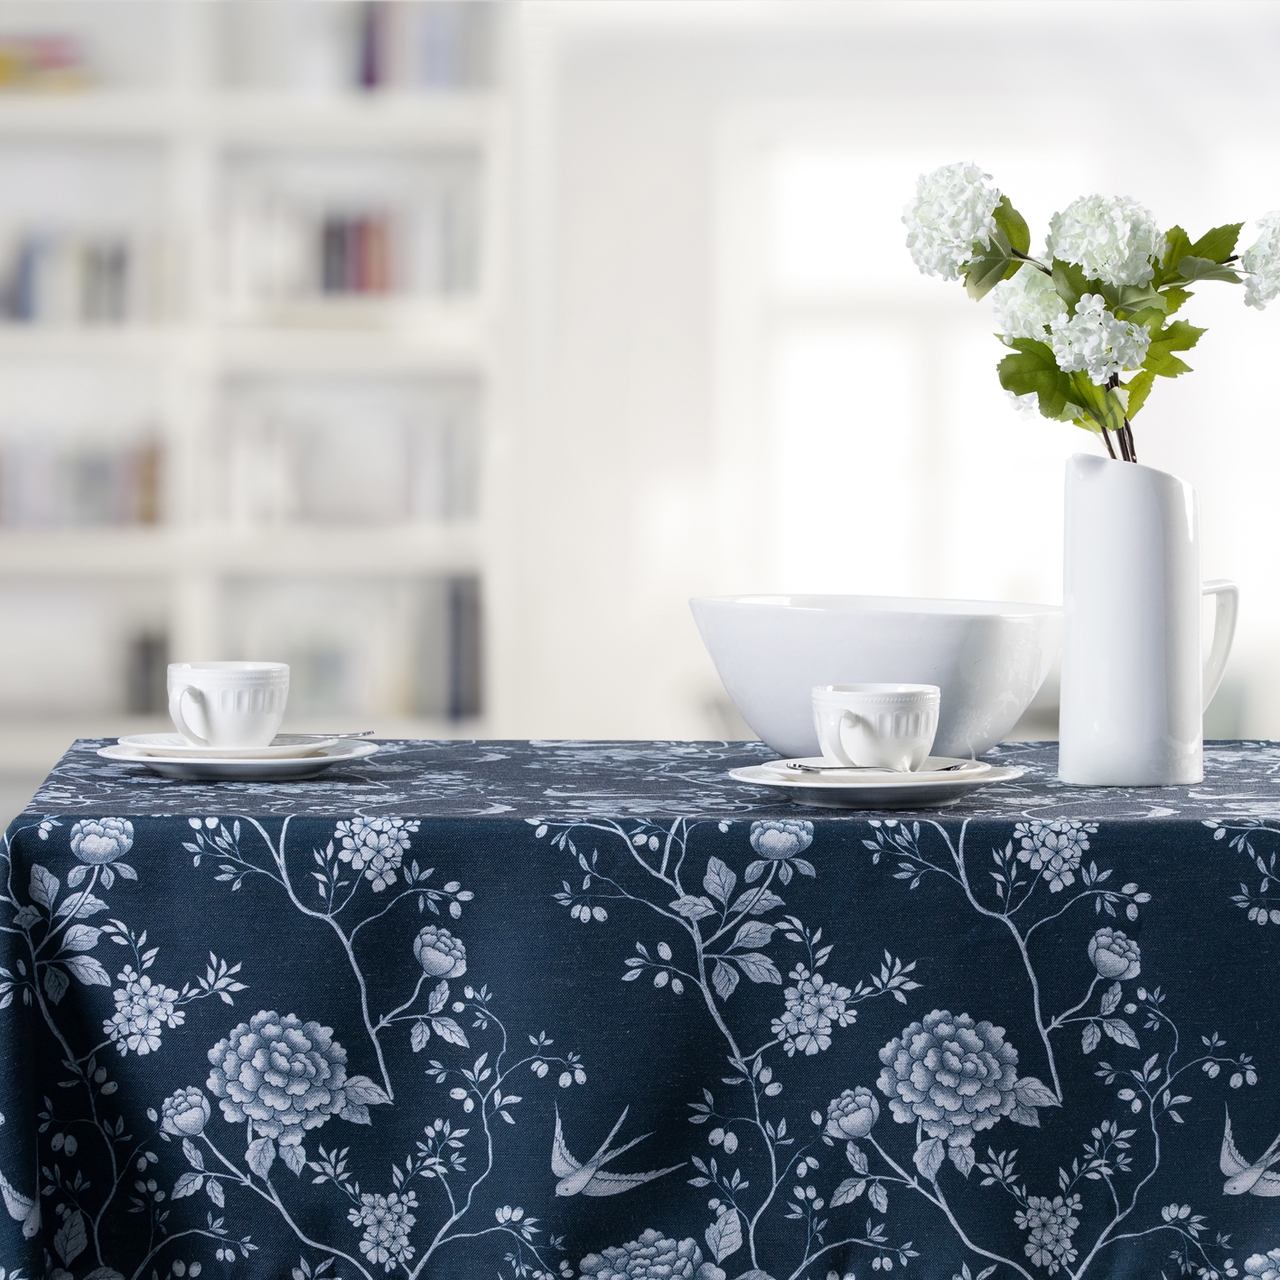 Celina Digby Luxury Eco-Friendly Recycled Linen-Like Fabric Tablecloth – Cecylia Navy Available in 6 Sizes 140 x 140cm